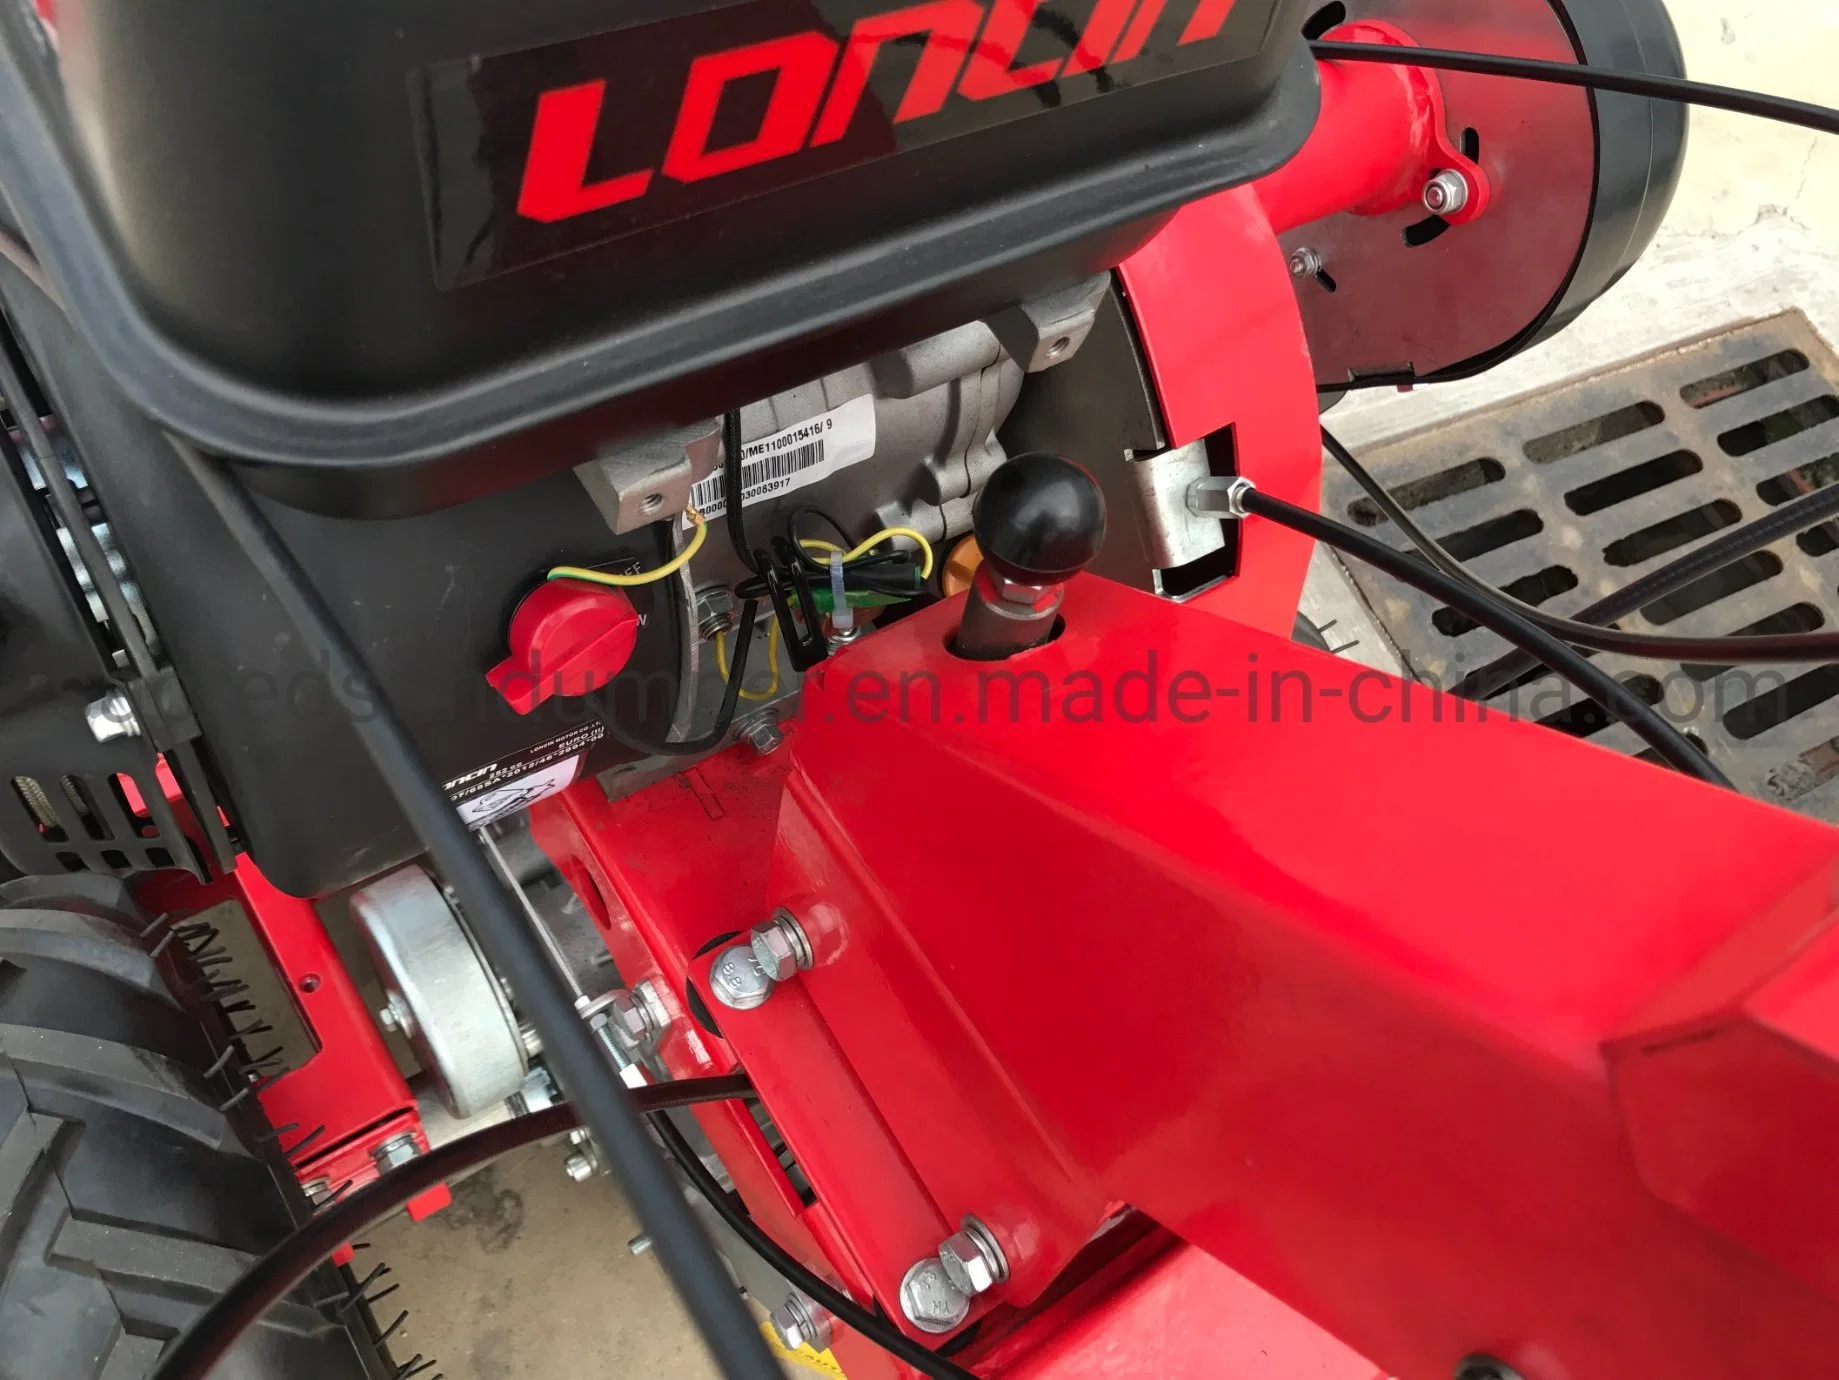 8HP Lawn Mower Grass Mower Mower Grass Trimmer Rotary Mower Weed Cutter Self Propelled with High quality/High cost performance 